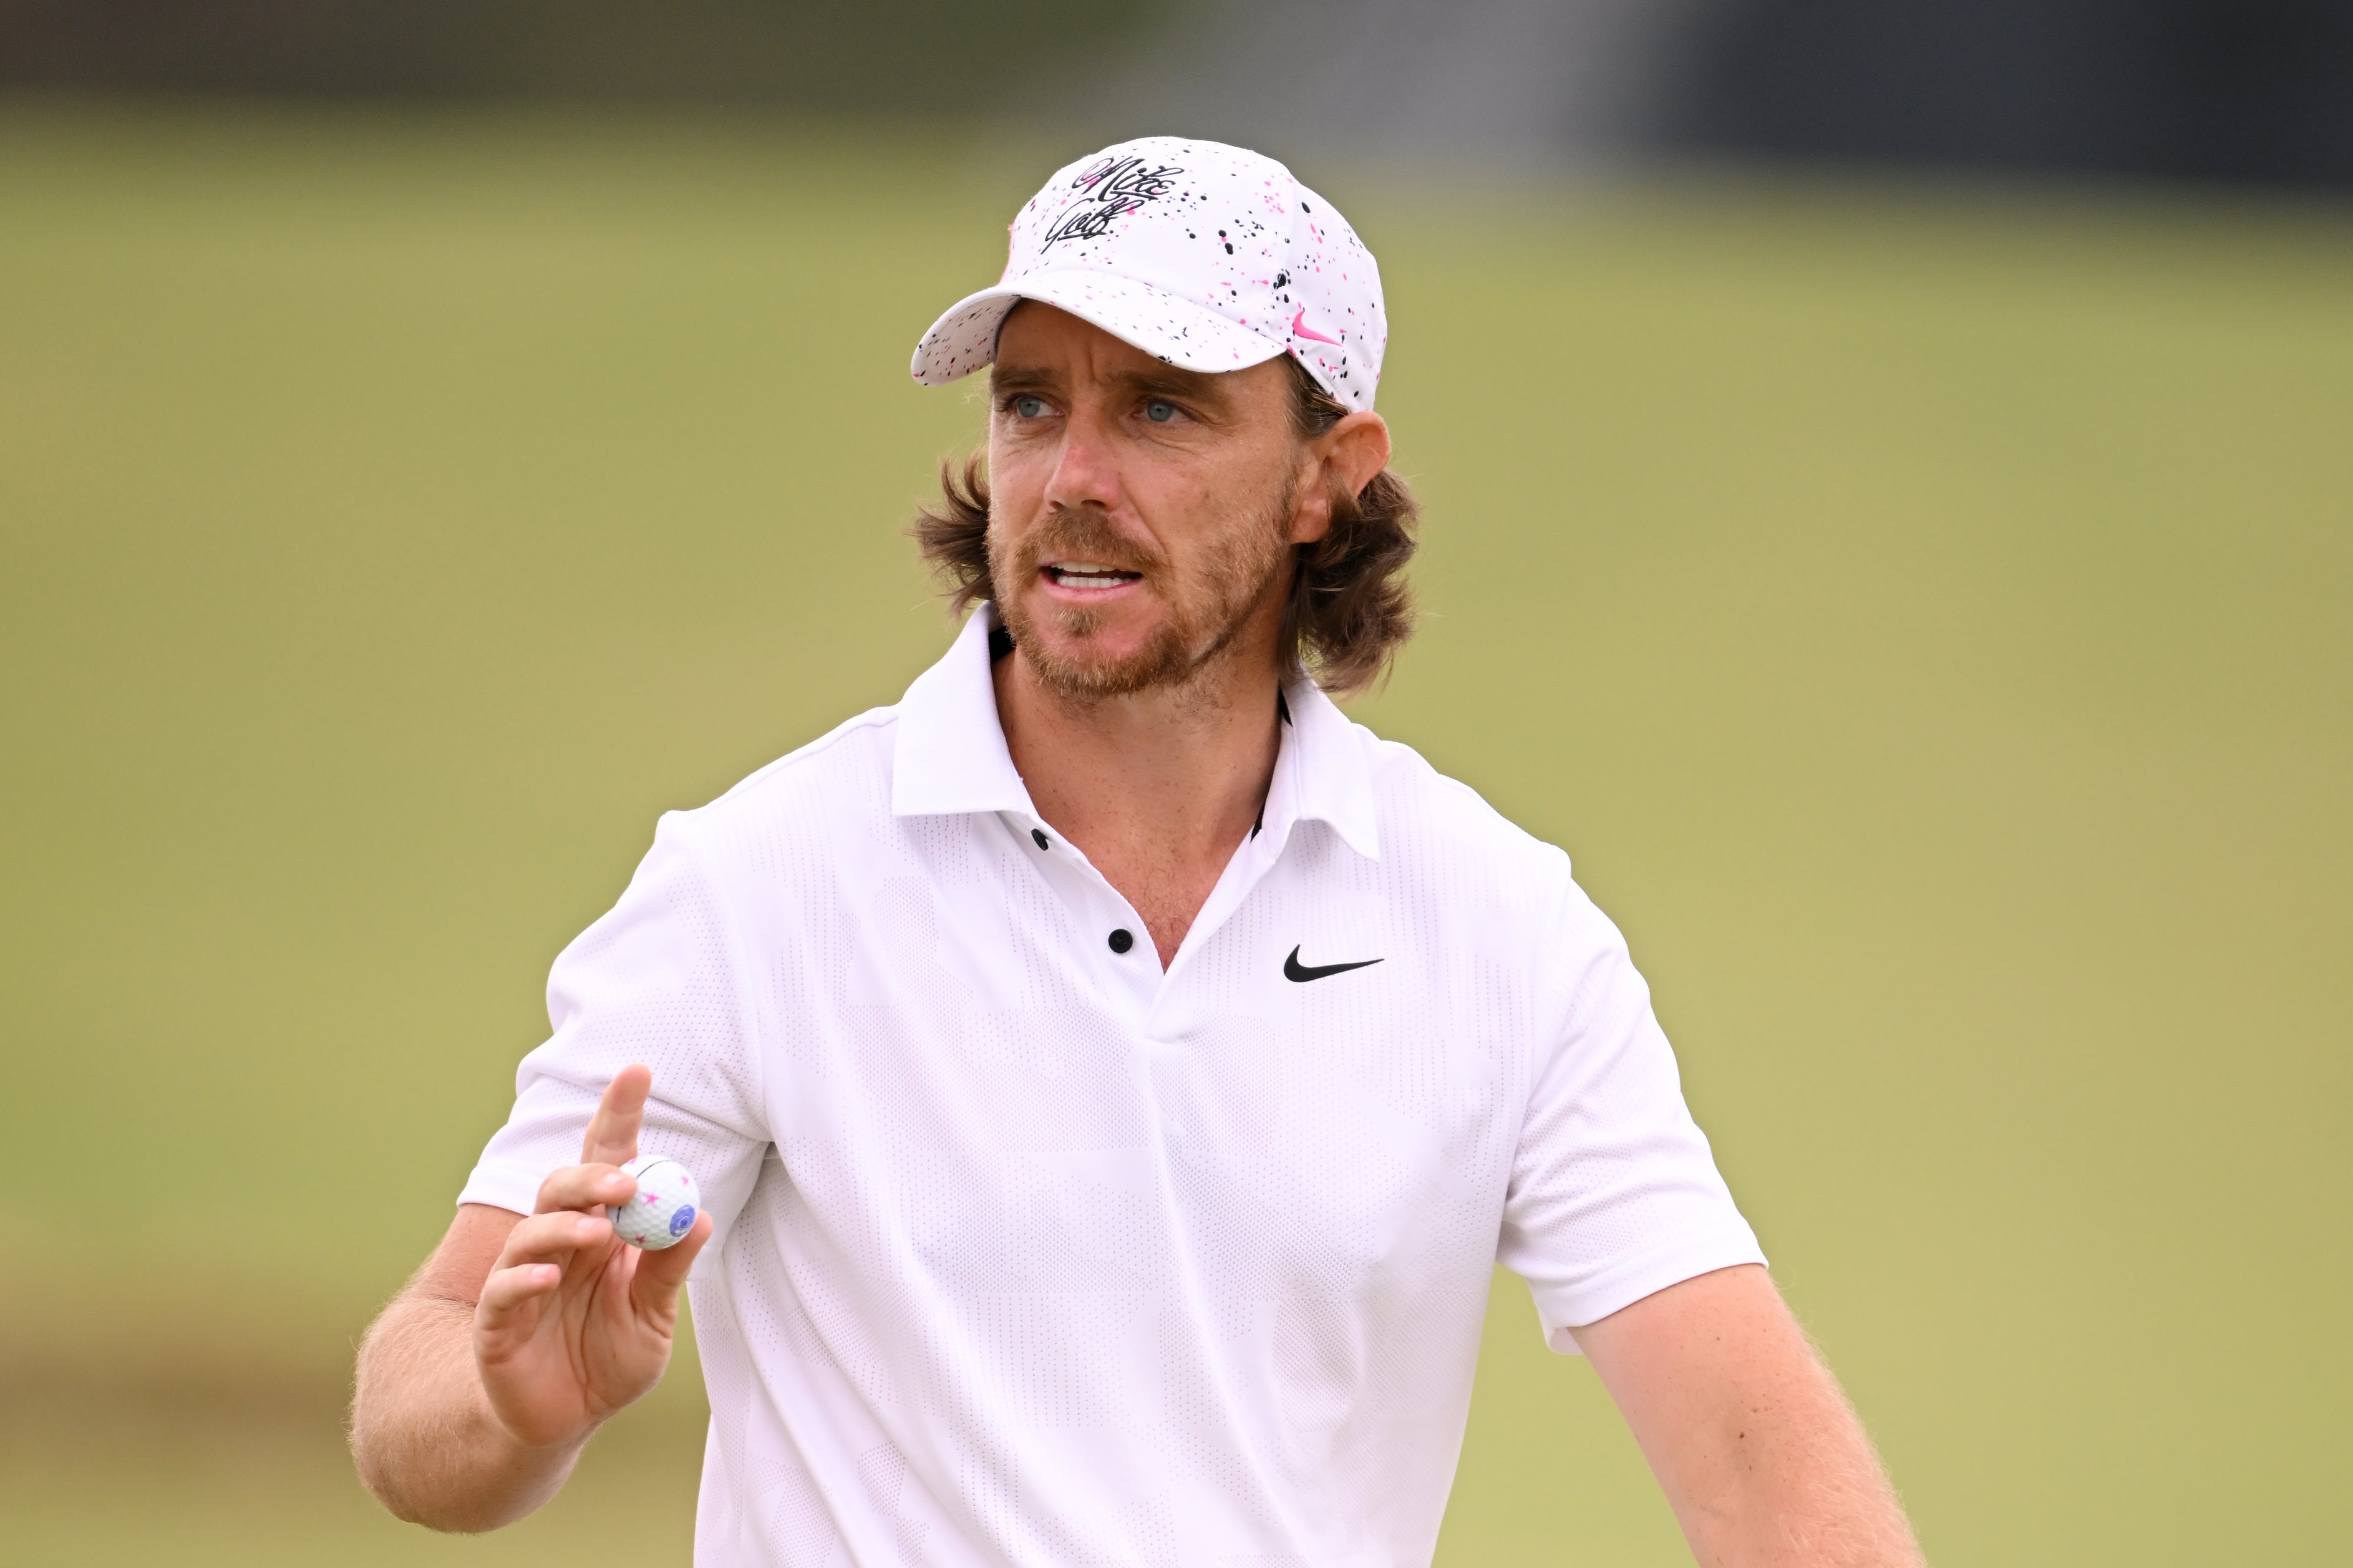 Tommy Fleetwood carded a brilliant 63 at Los Angeles Country Club